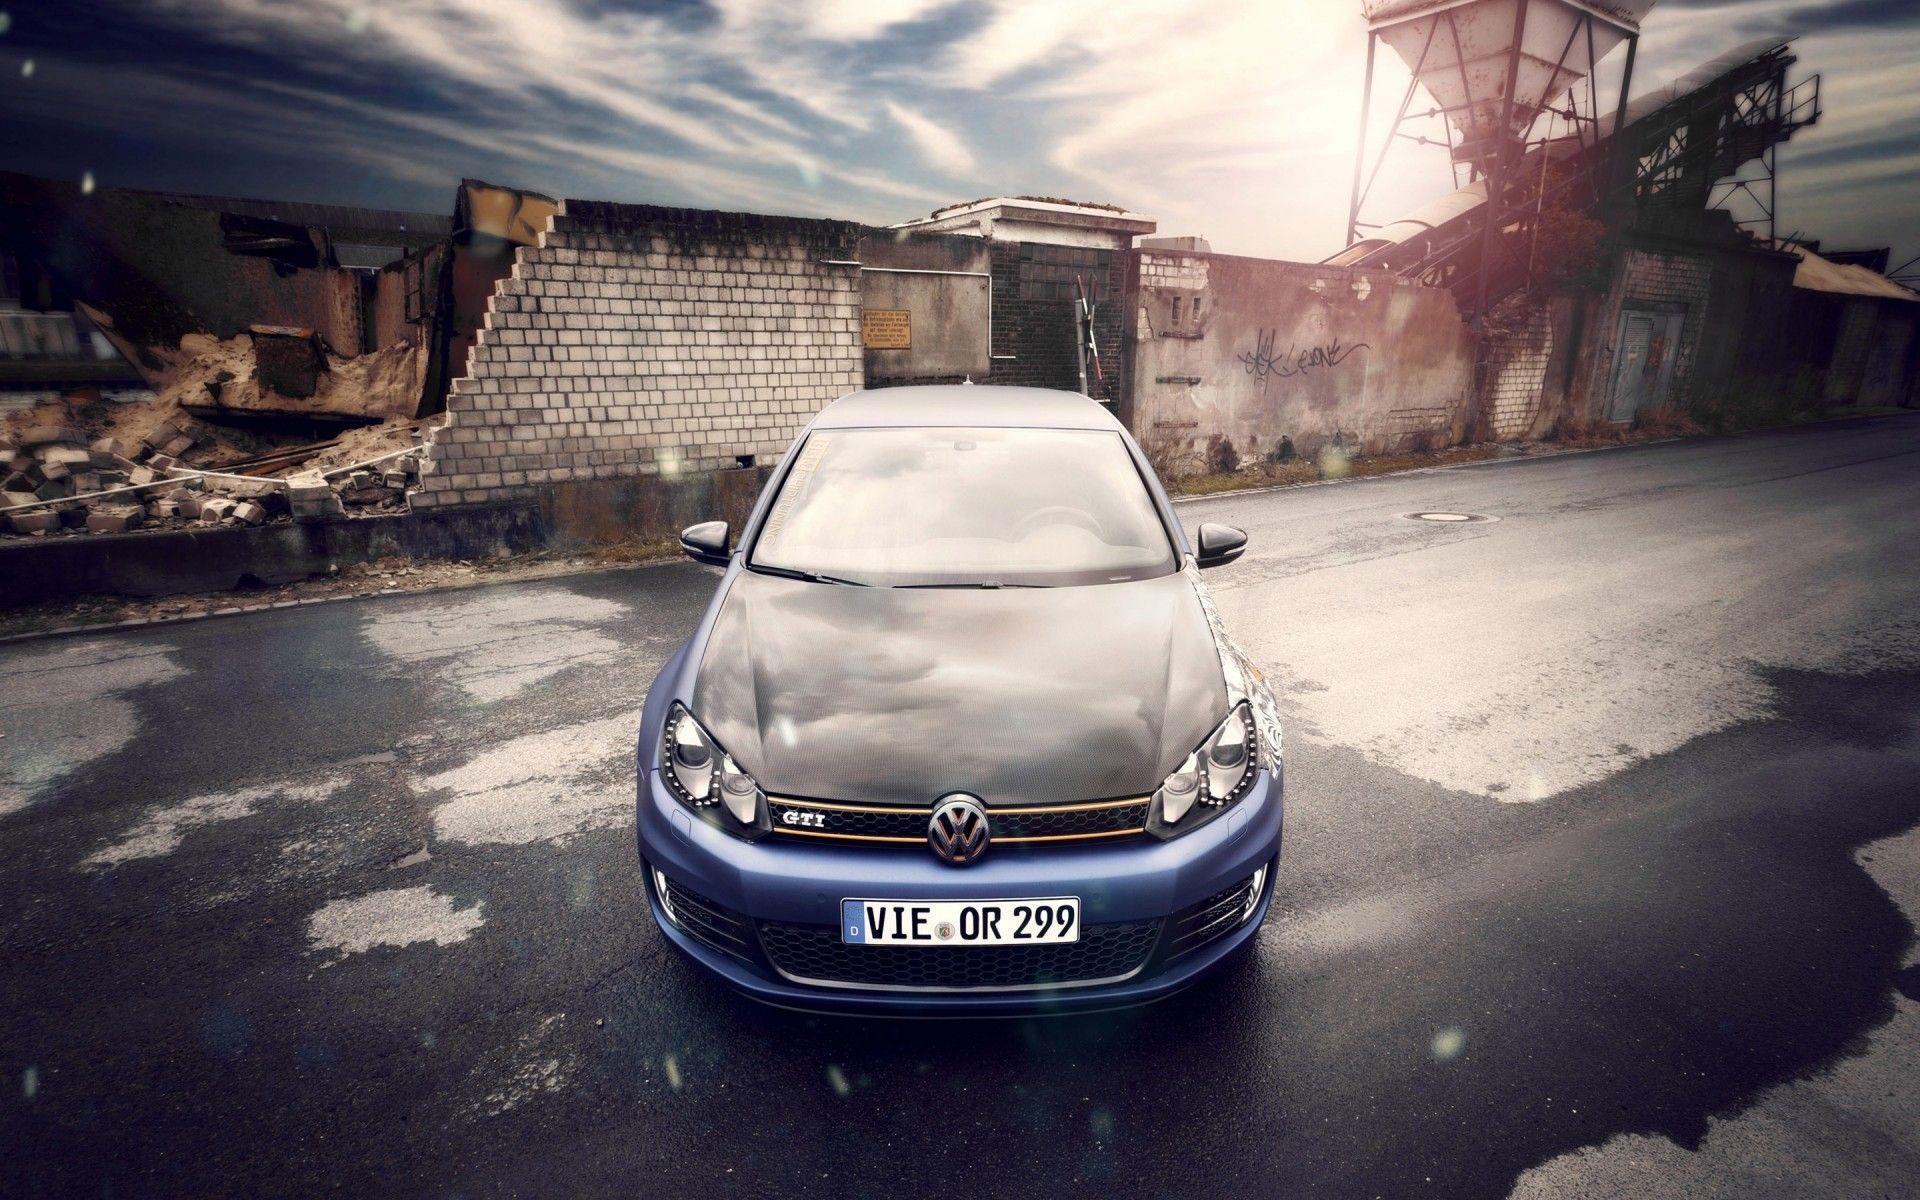 VW Golf 6 by BBM. Android wallpaper for free